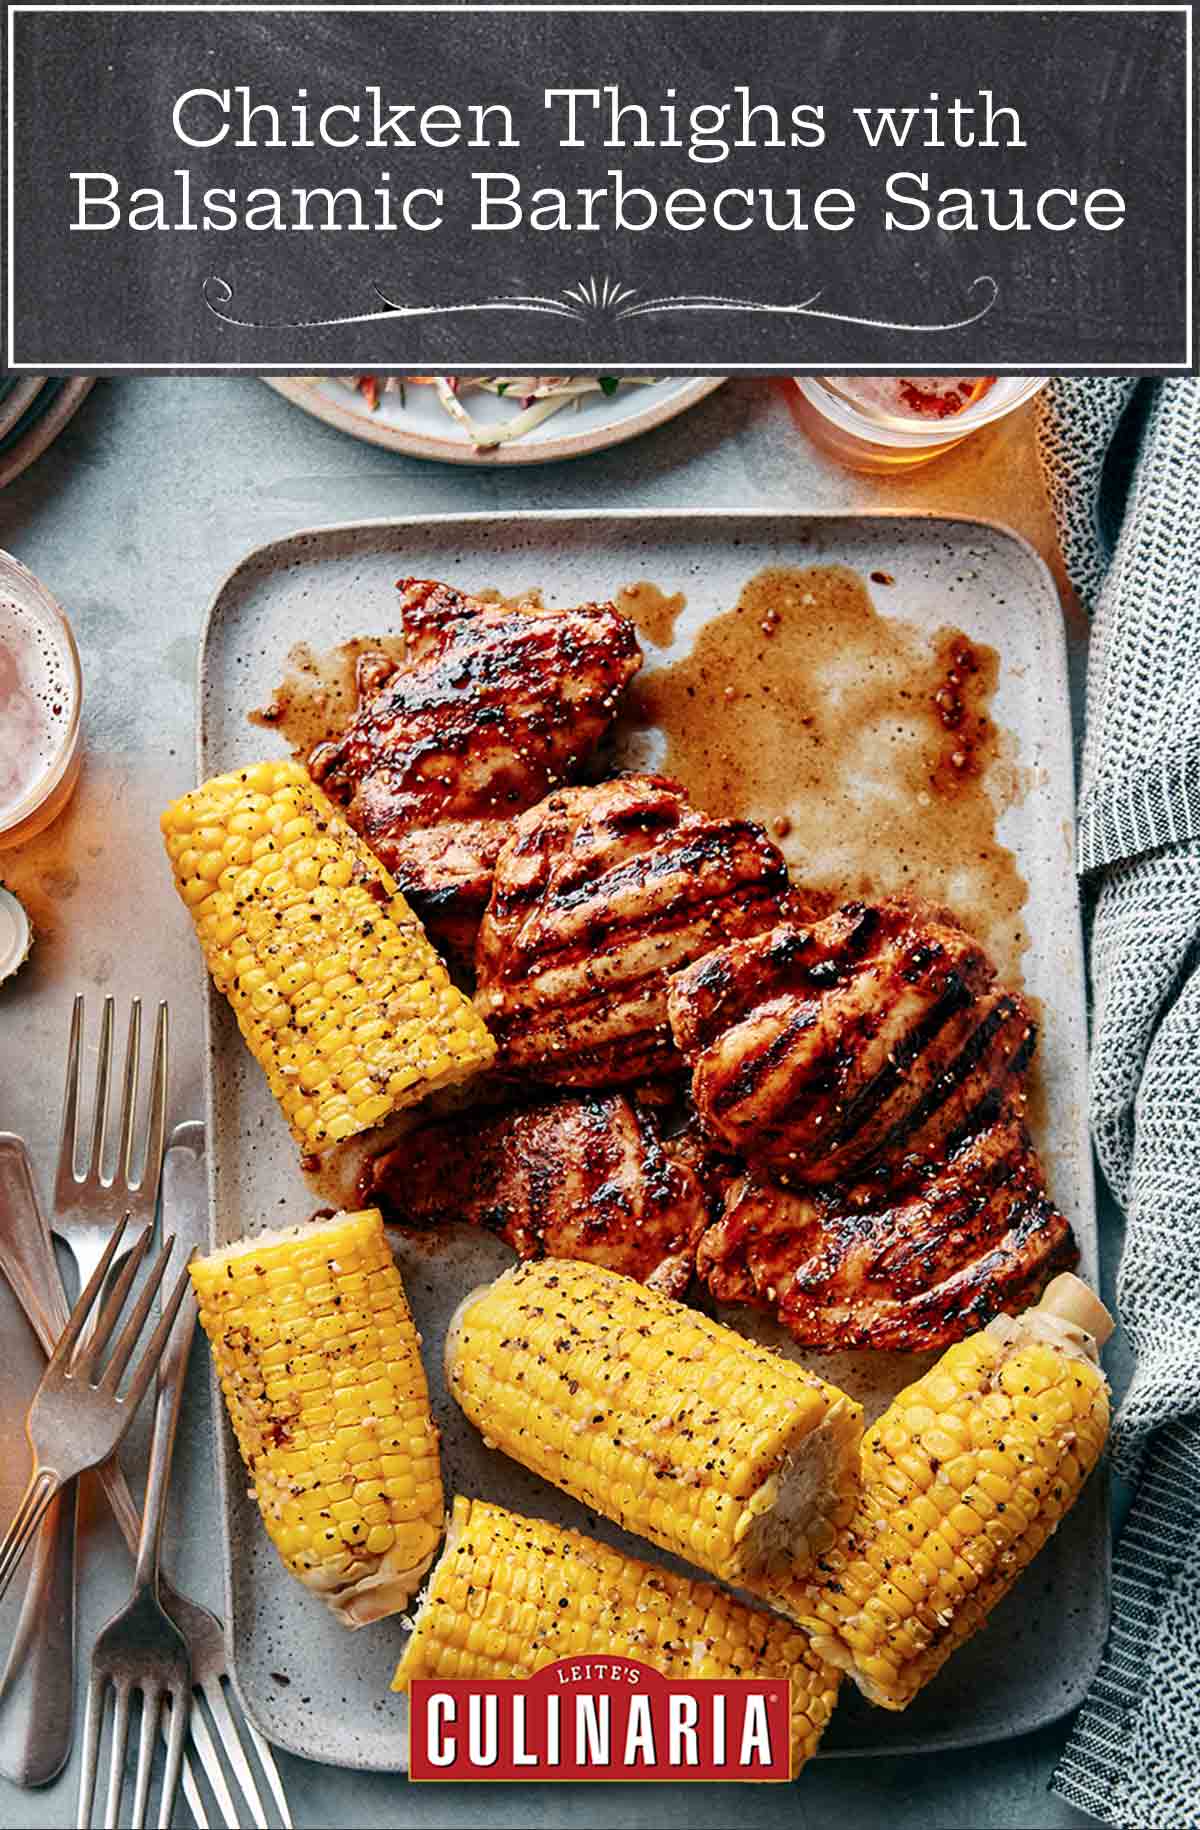 A tray of chicken thighs with balsamic barbecue sauce, corn on the cob, glasses of beer, forks, and plates.